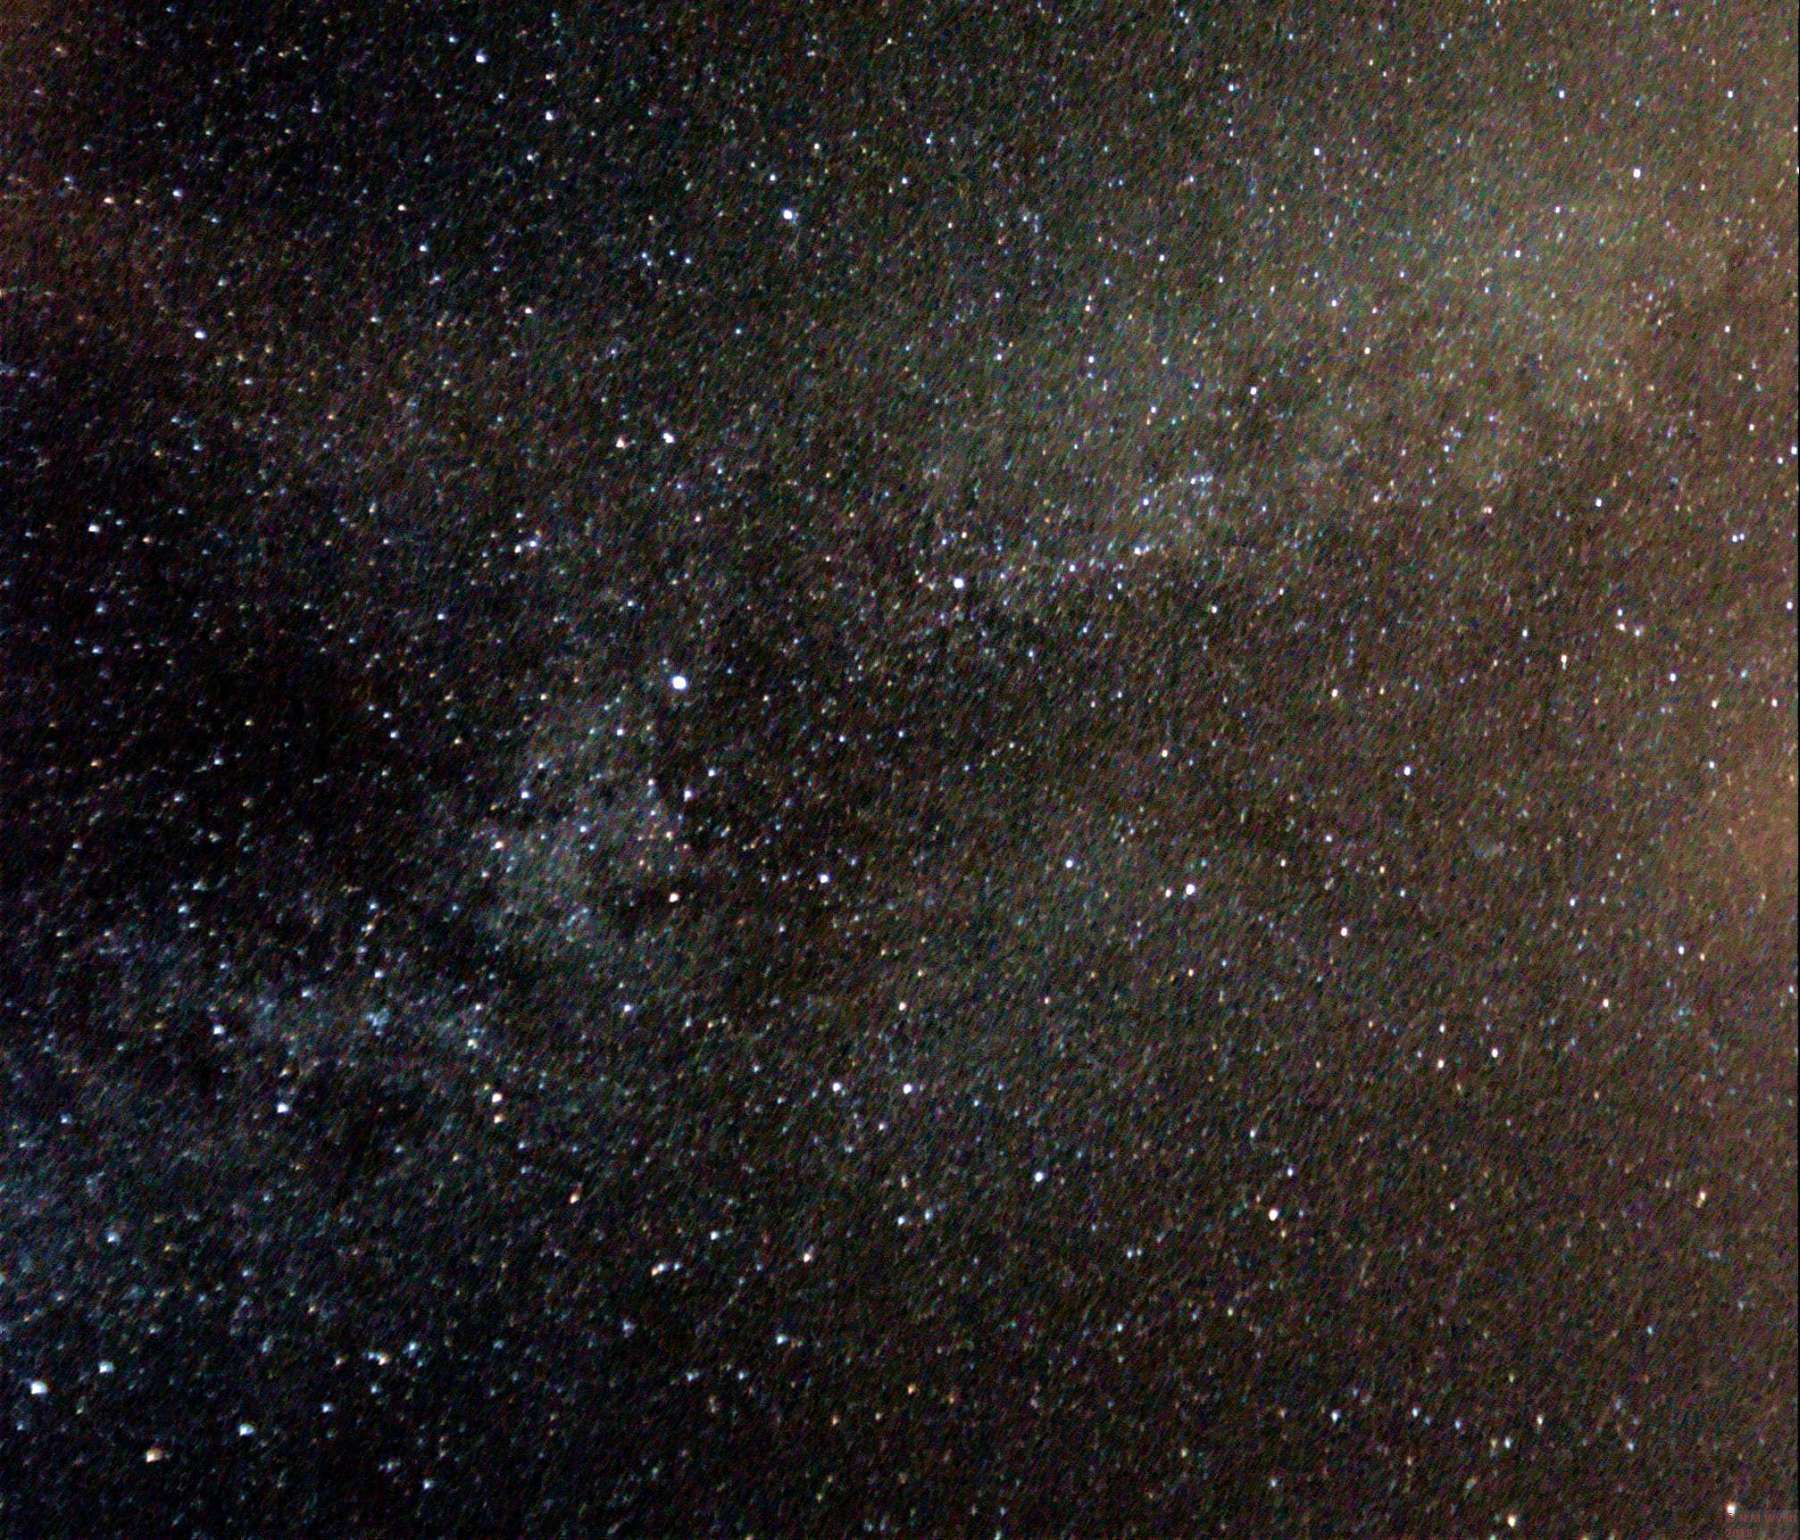 The constellation of Cygnus lies across part of the Milky Way